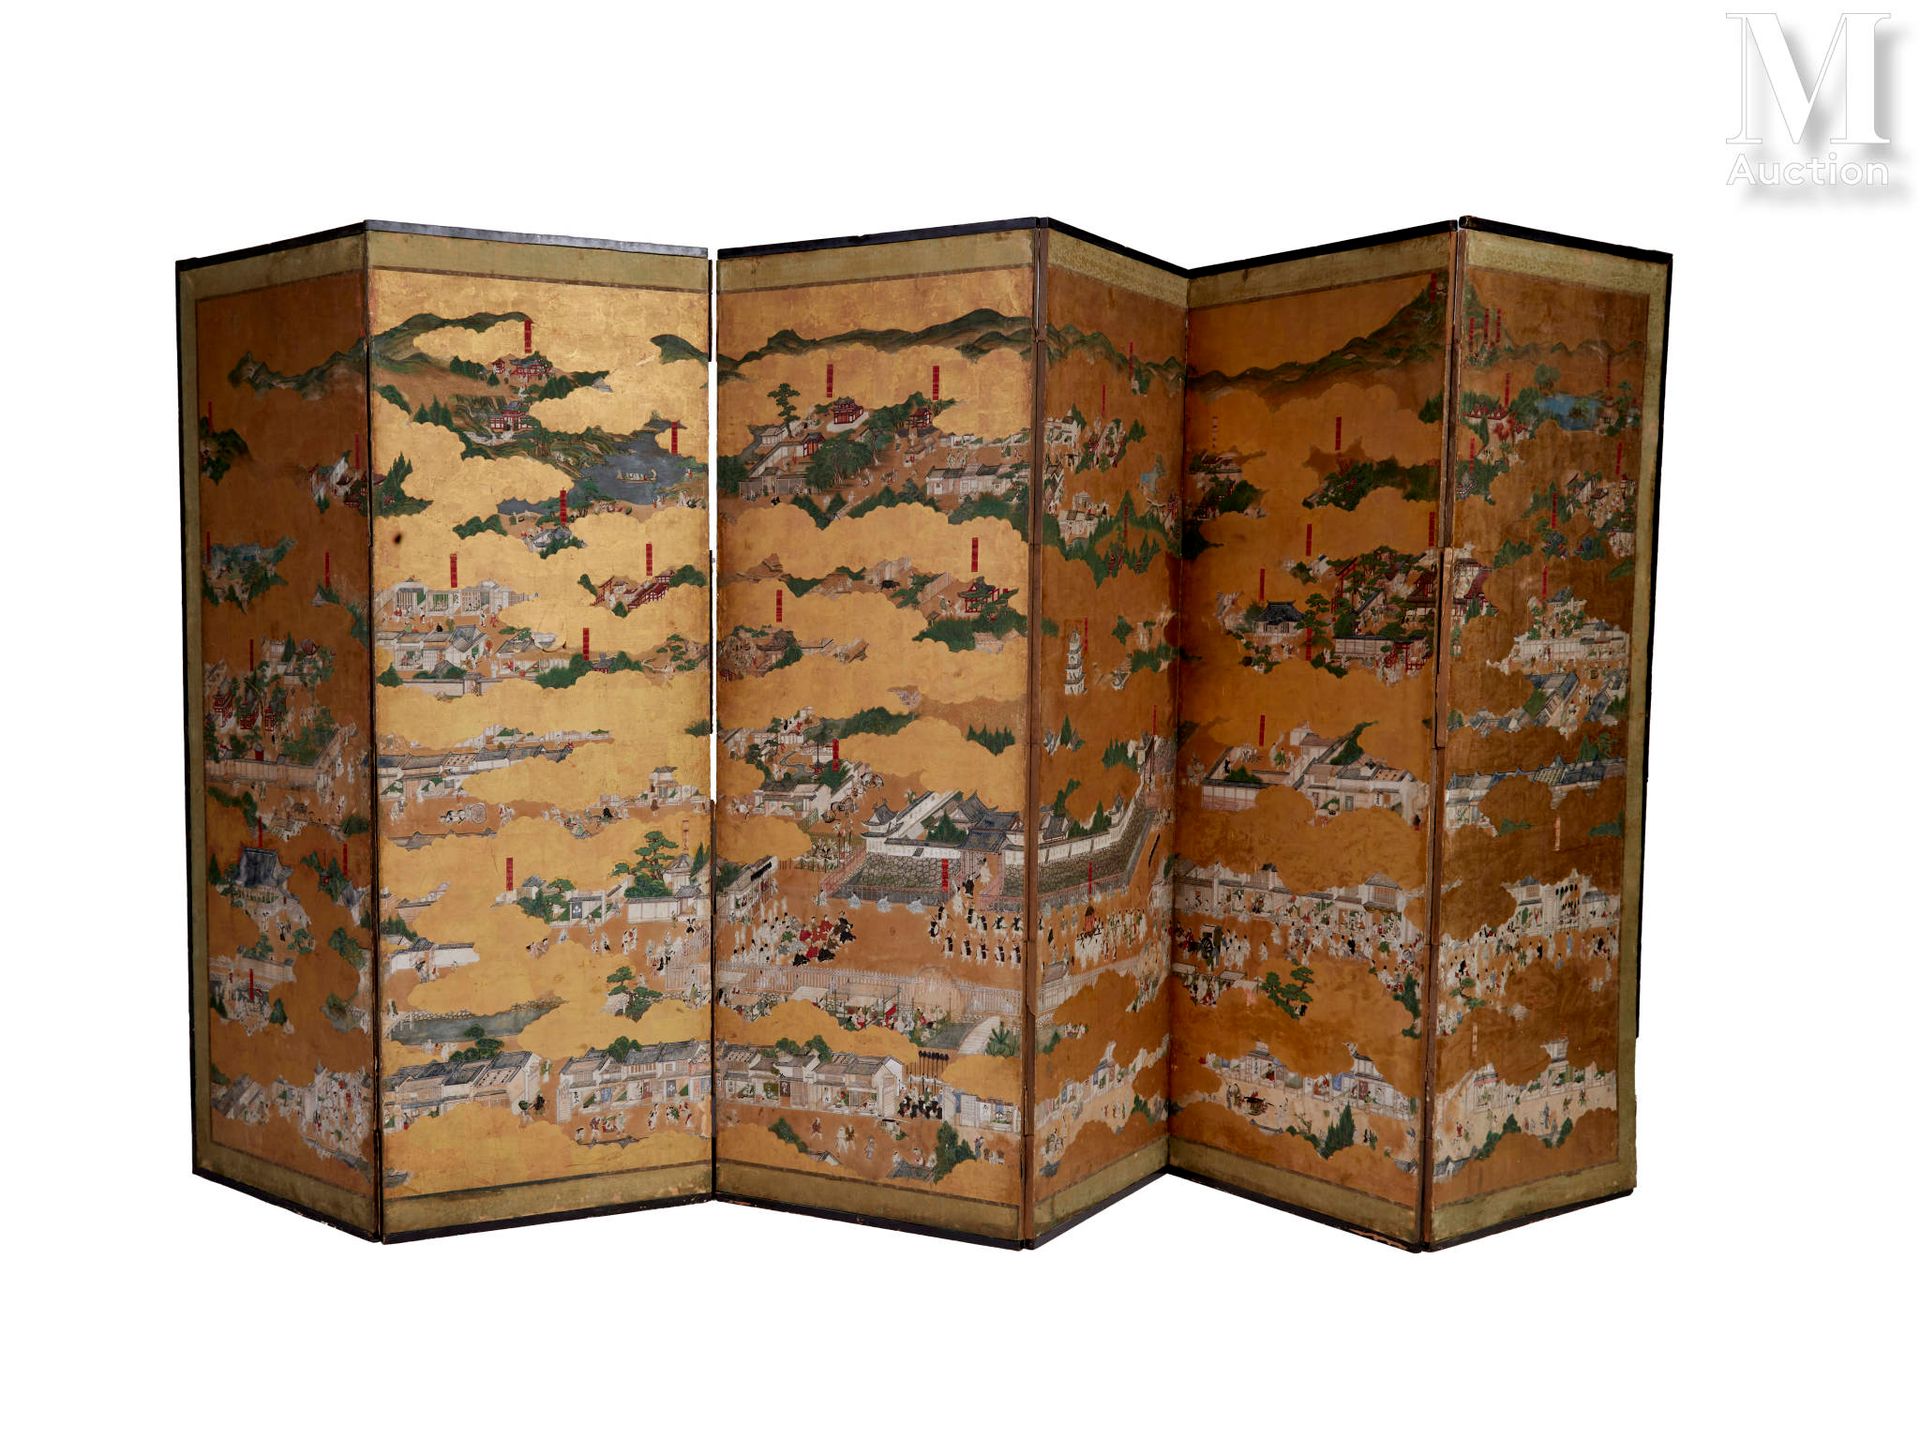 JAPON, XVIIIe siècle Six-leaf folding screen

in color ink and gold on paper, re&hellip;